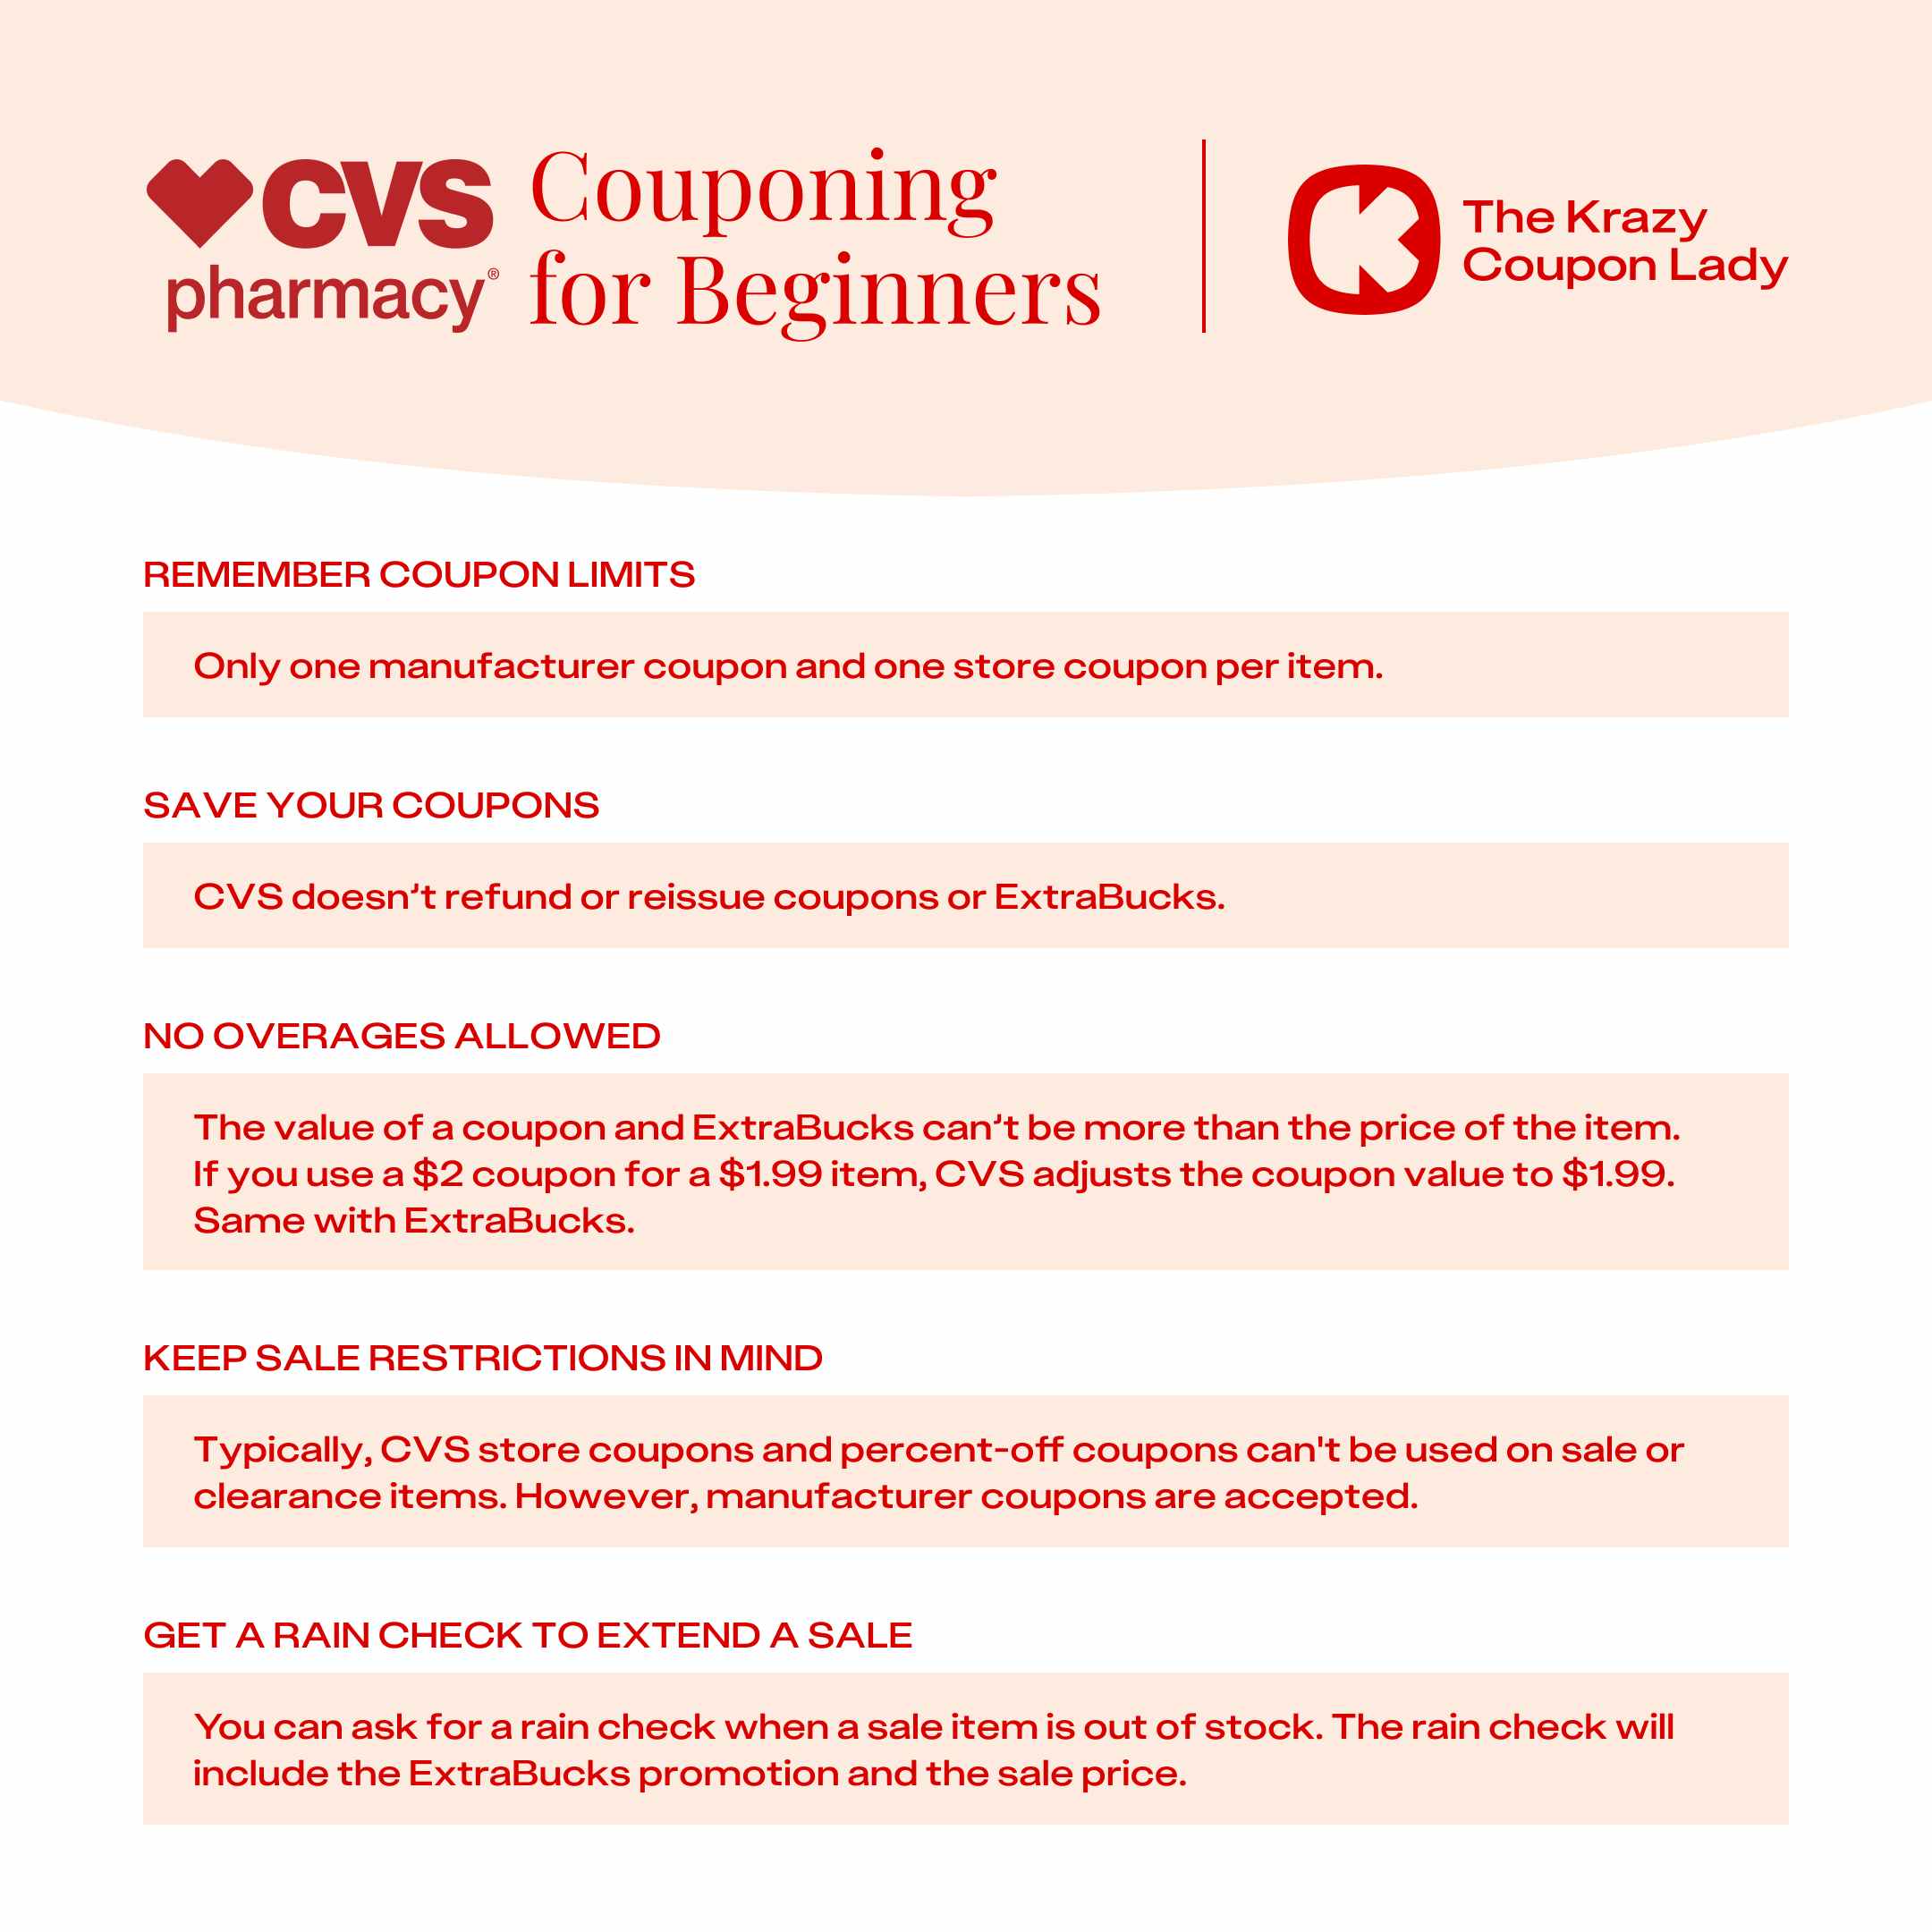 a list of tips for CVS couponing for beginners